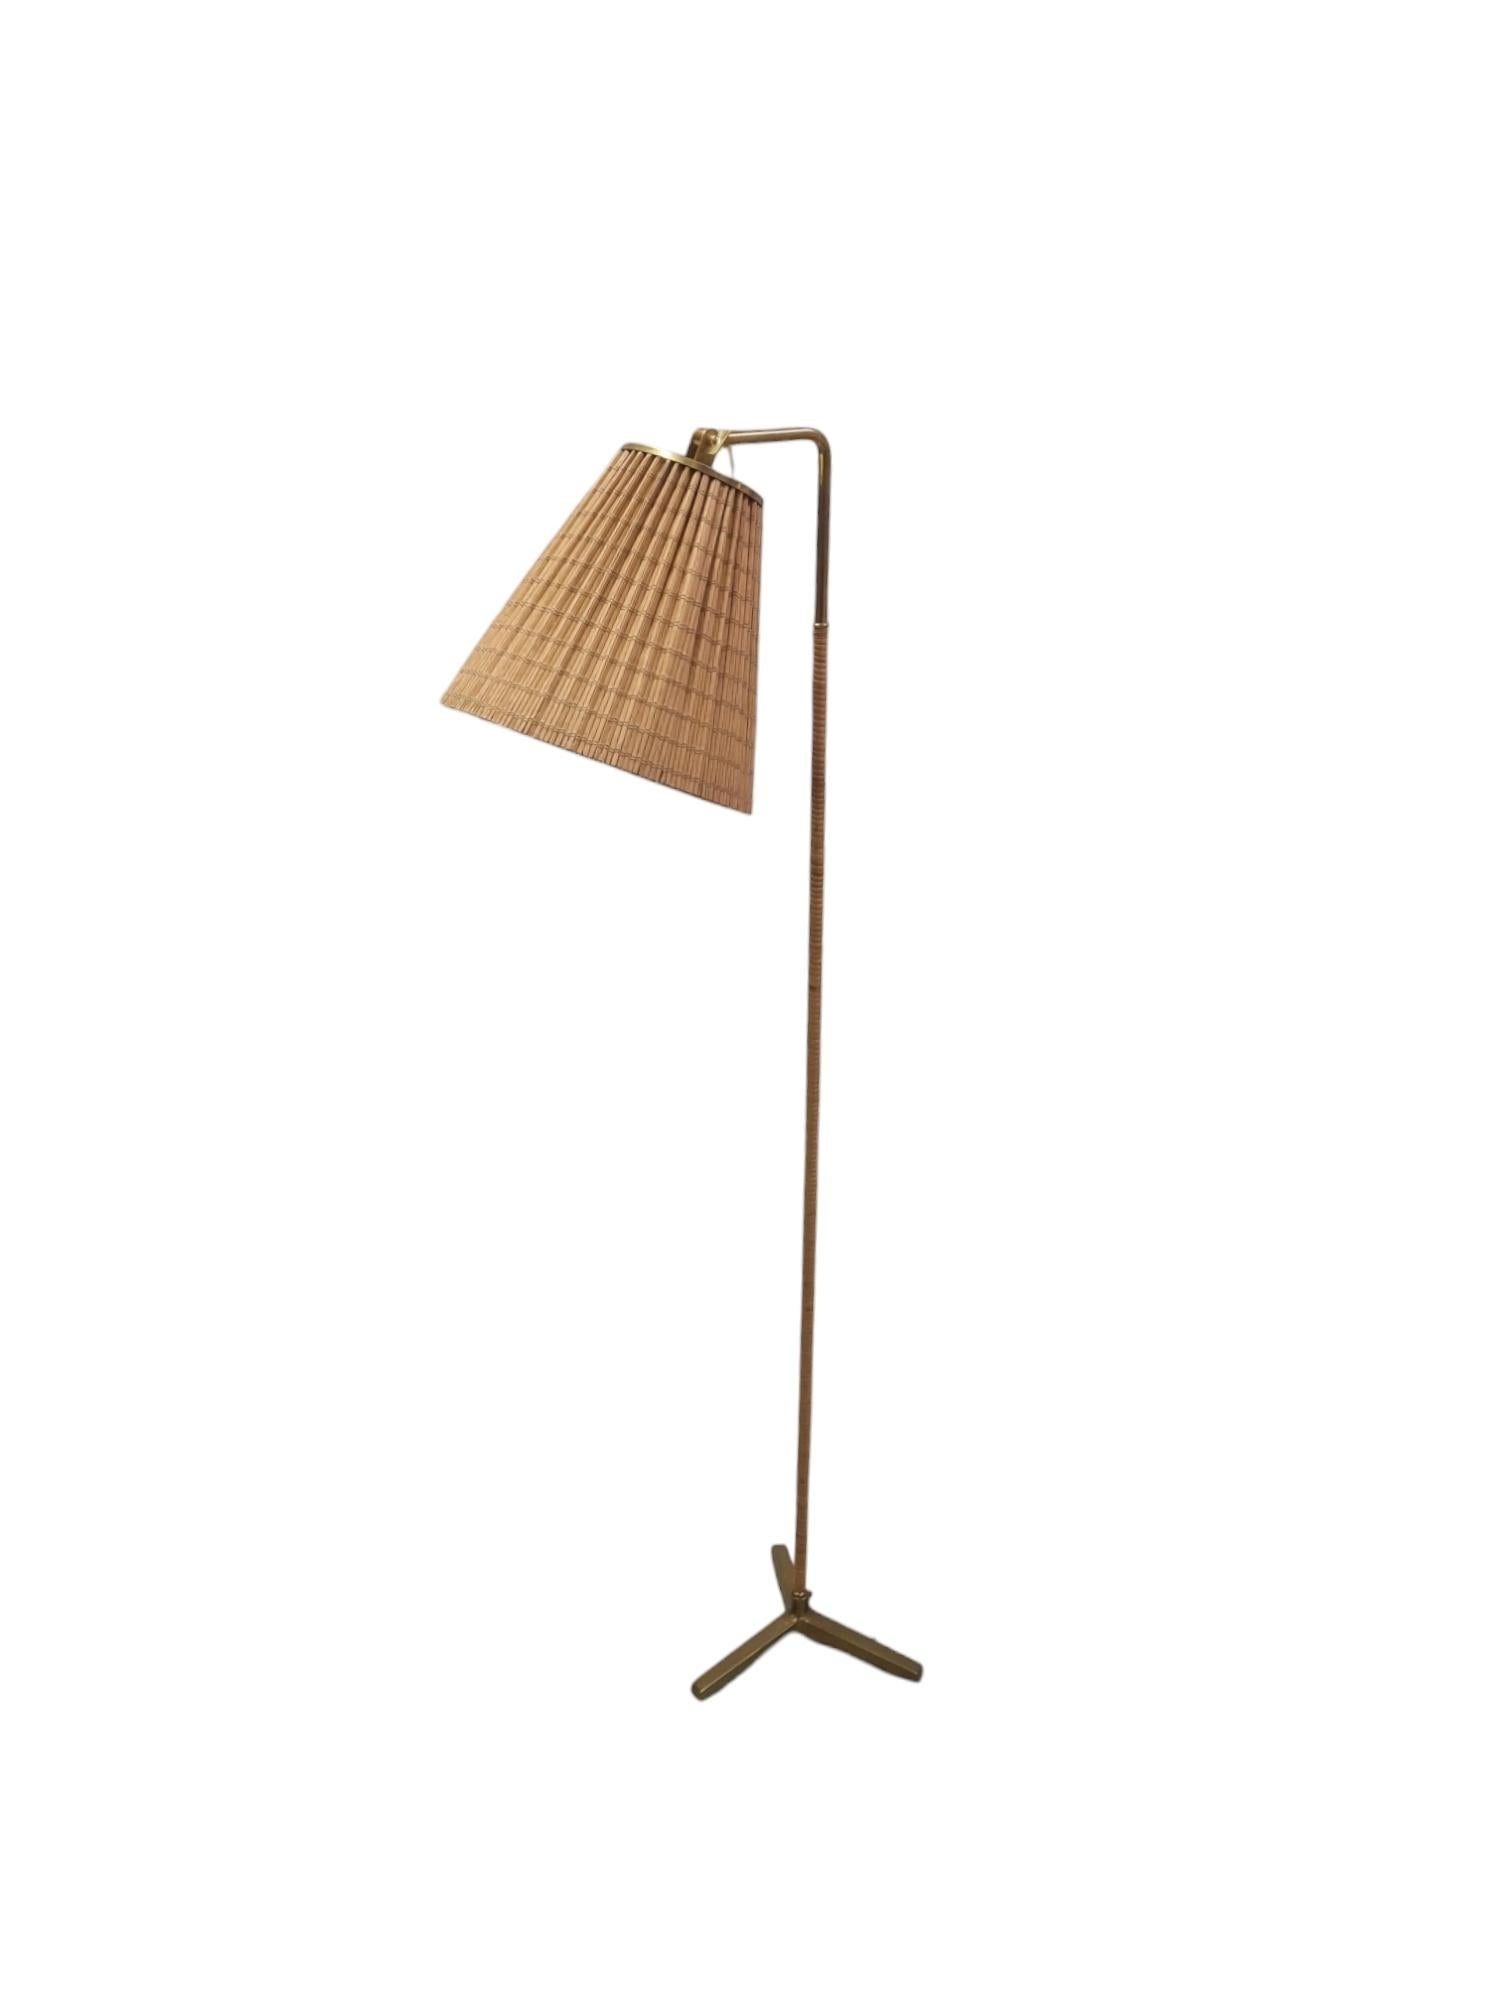 Brass Paavo Tynell Floor Lamp Model 9631, Taito Oy For Sale